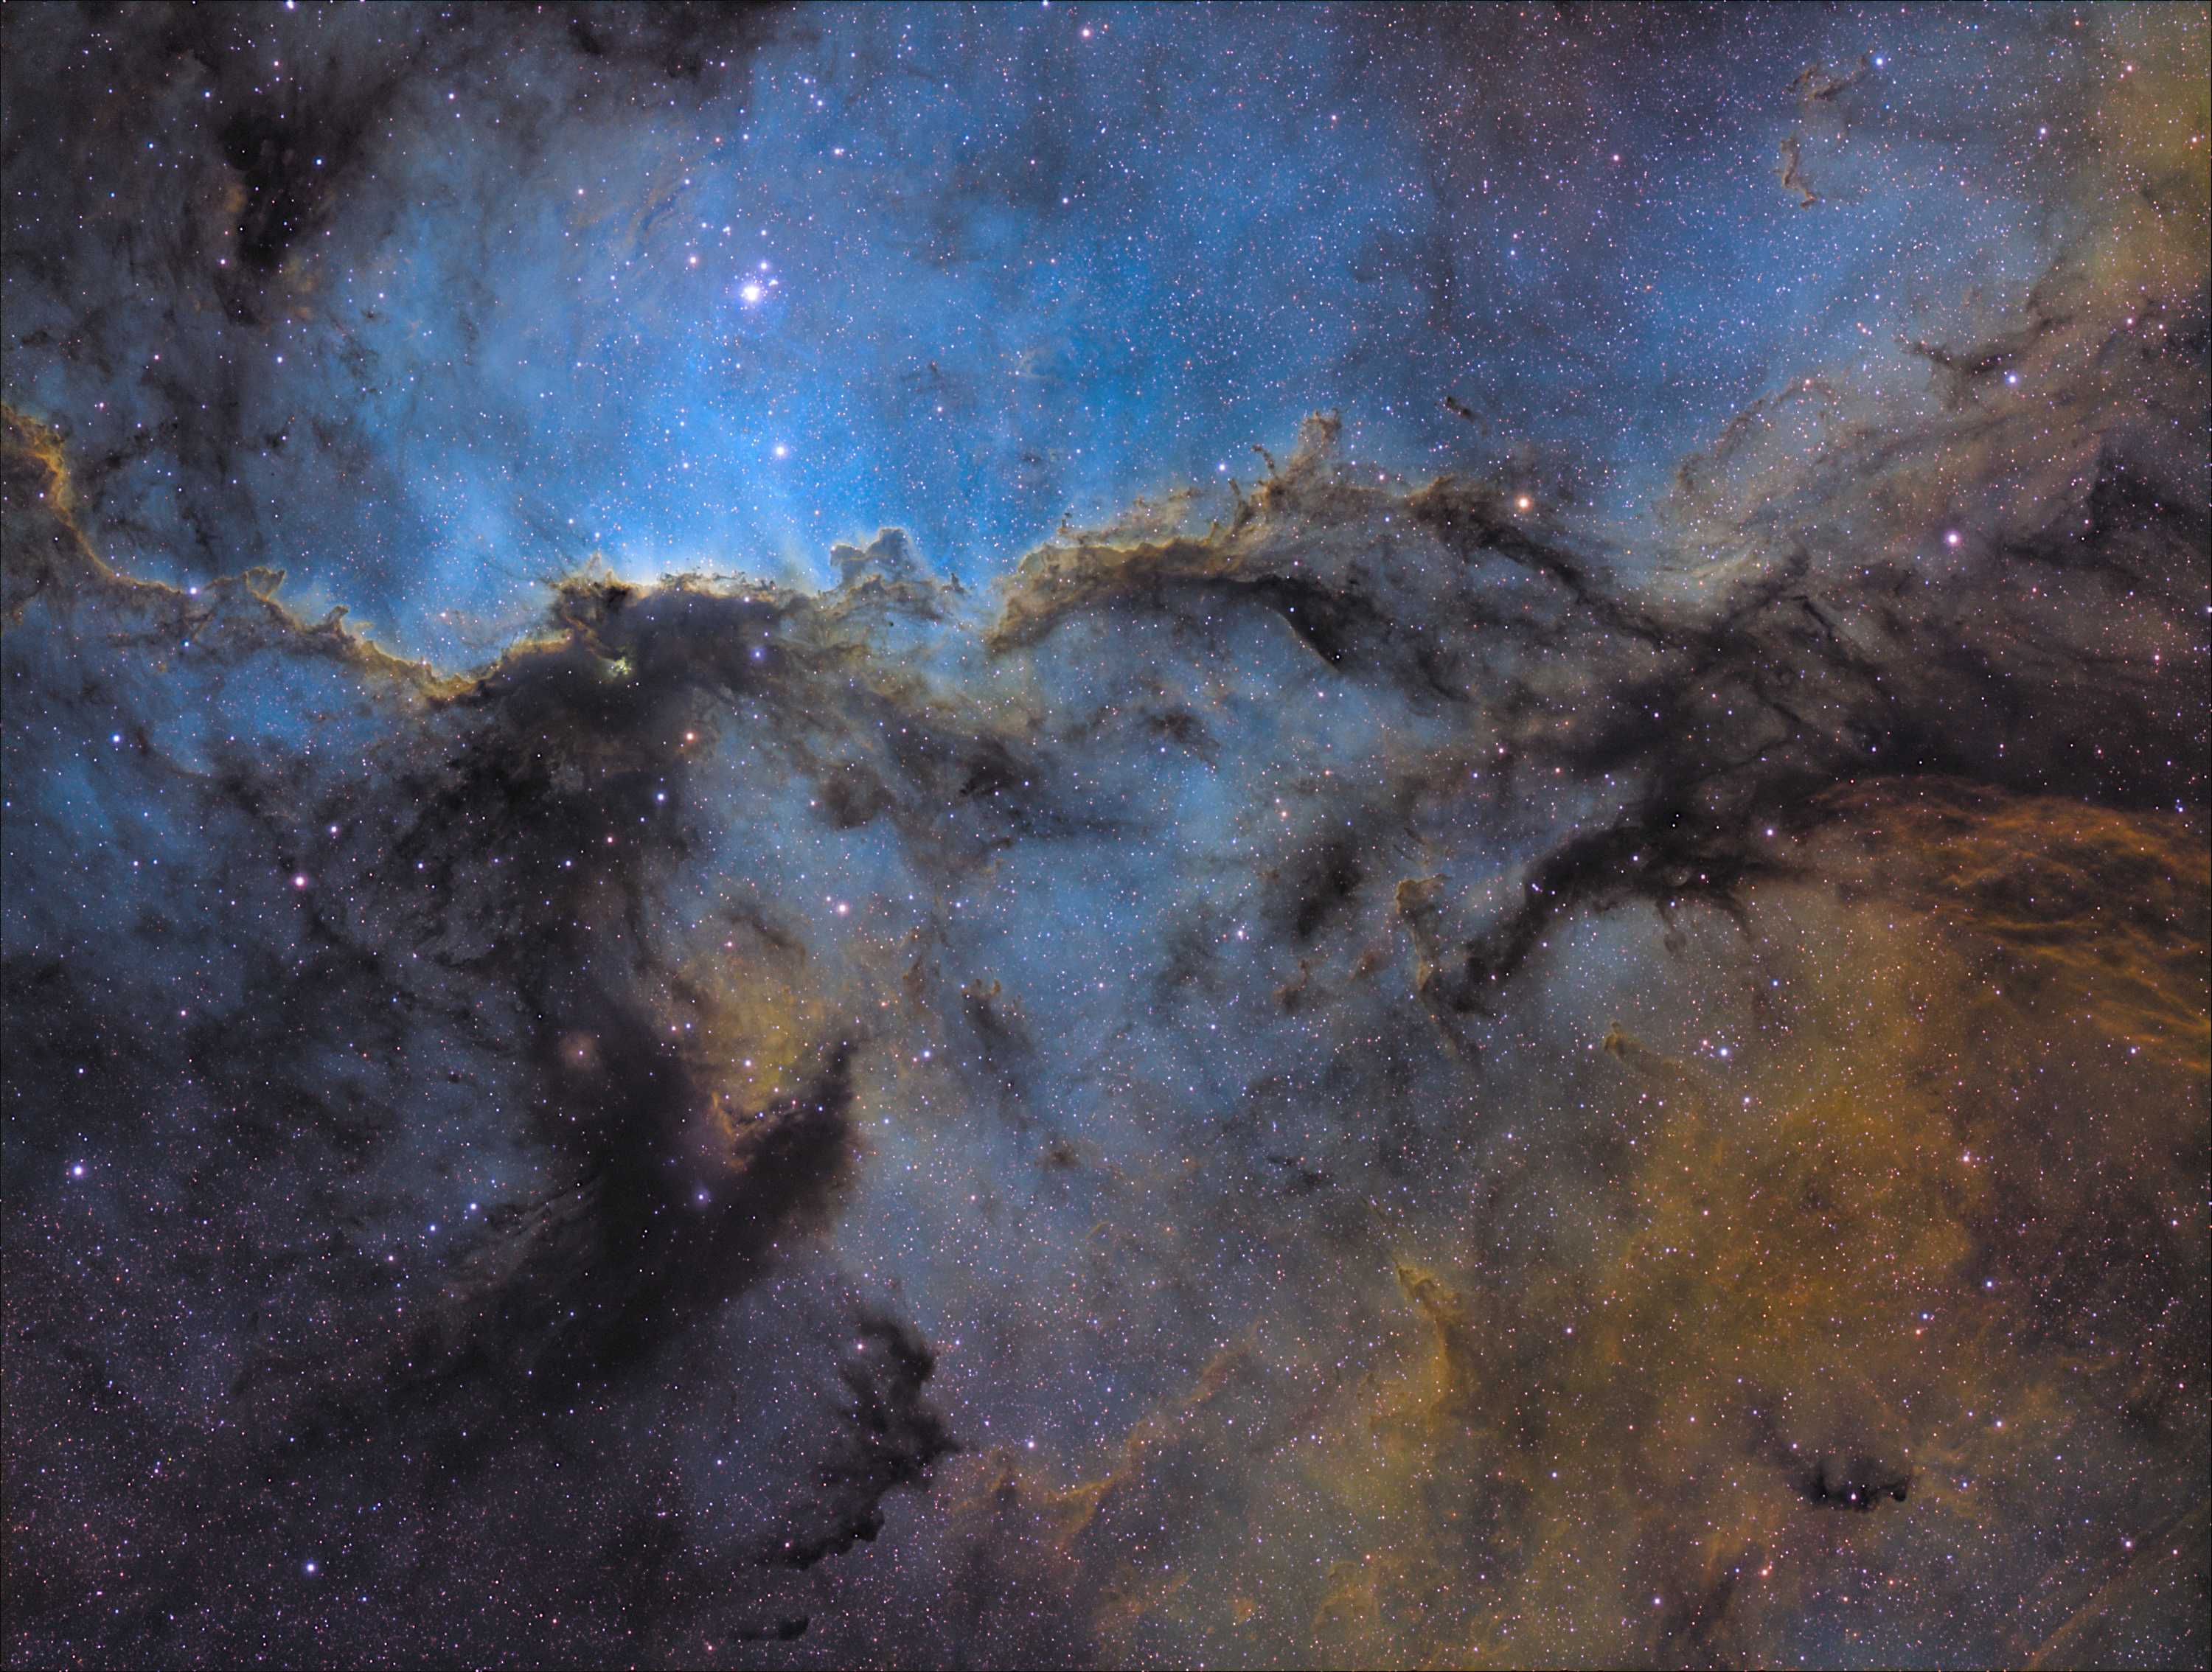 A gas and dust emission nebula in space.